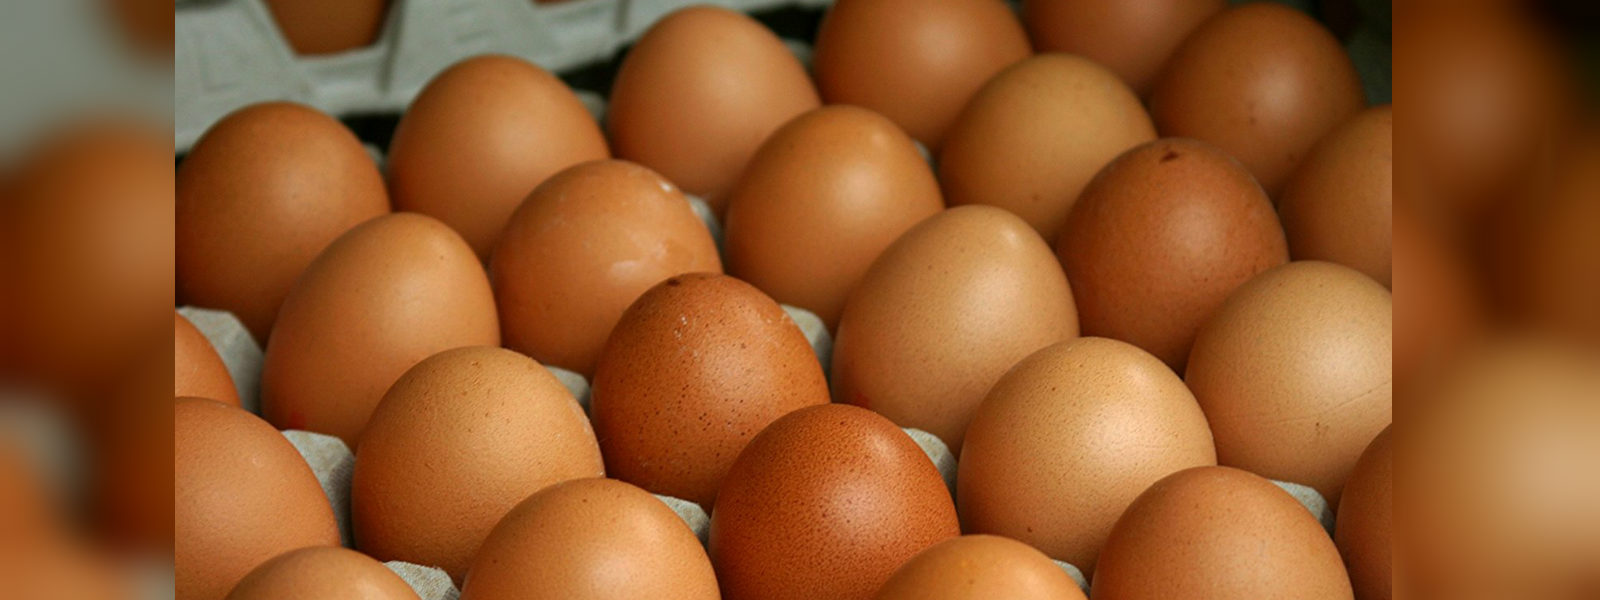 Government stops importing eggs